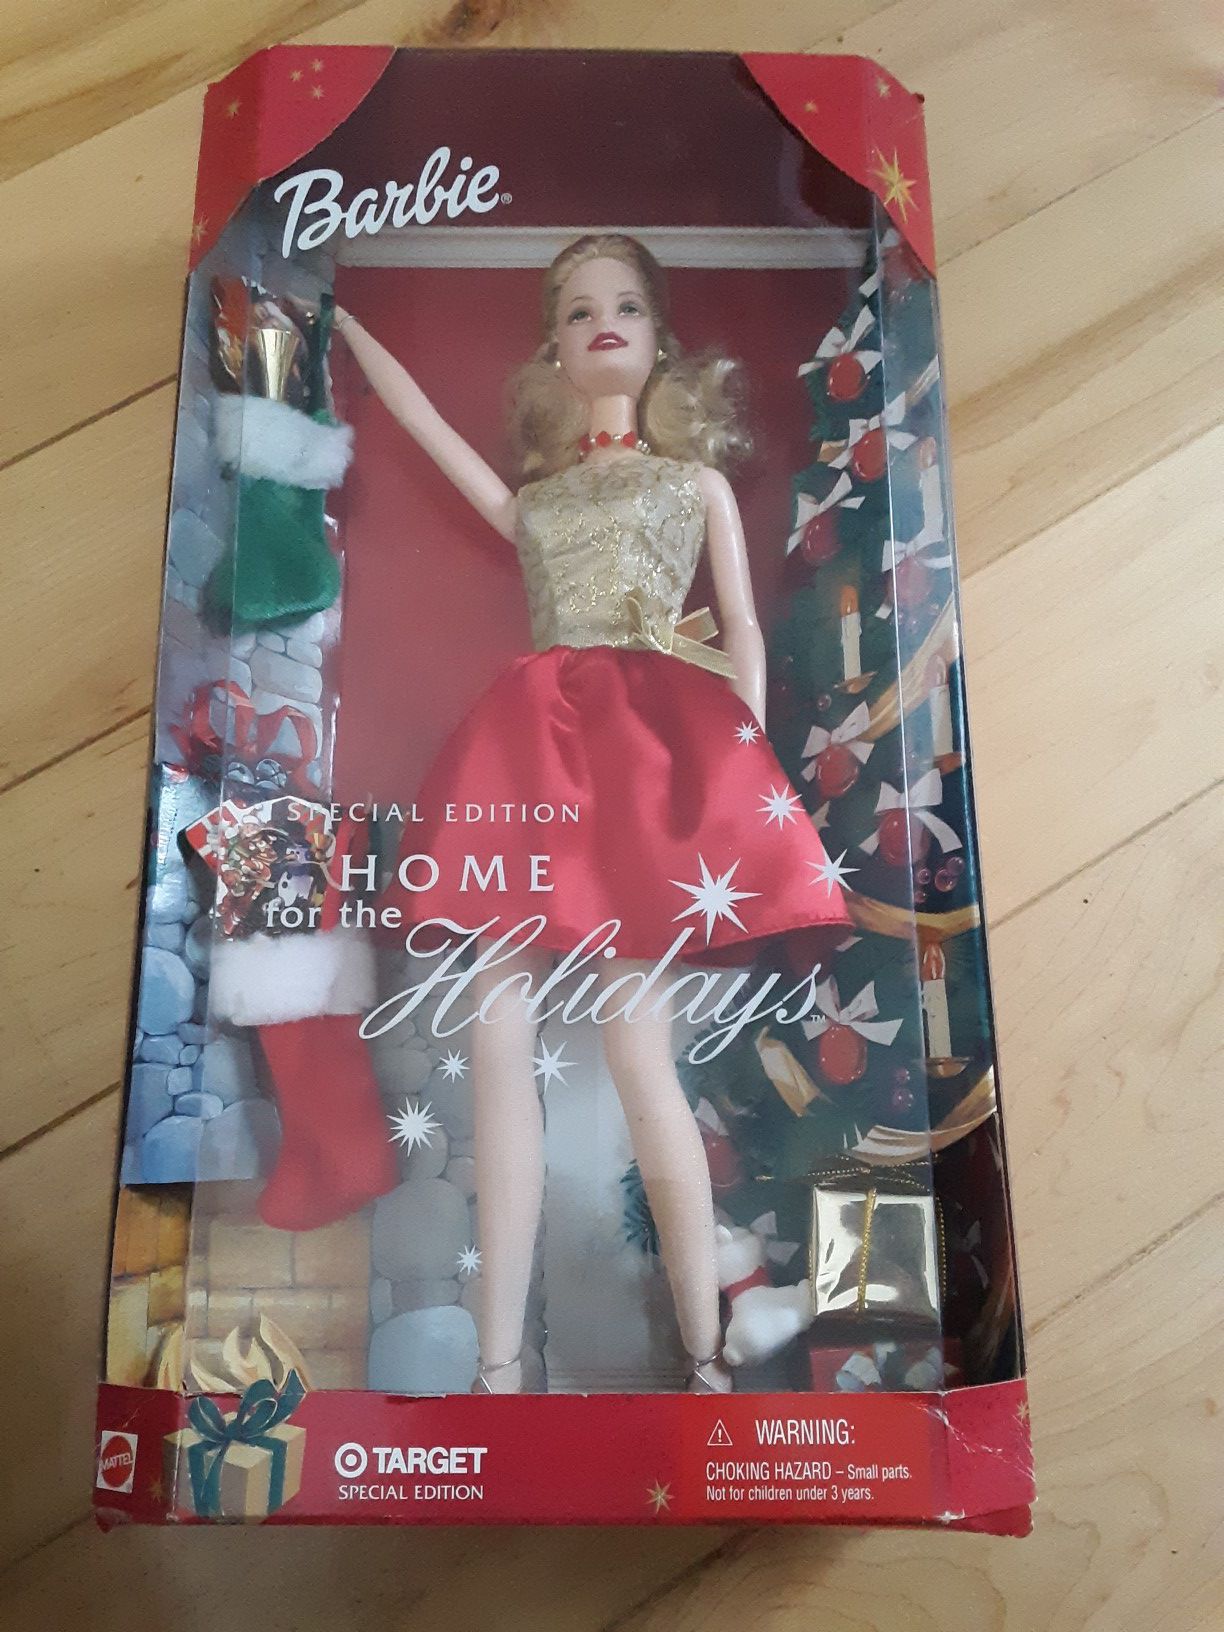 Home for the holidays Barbie doll